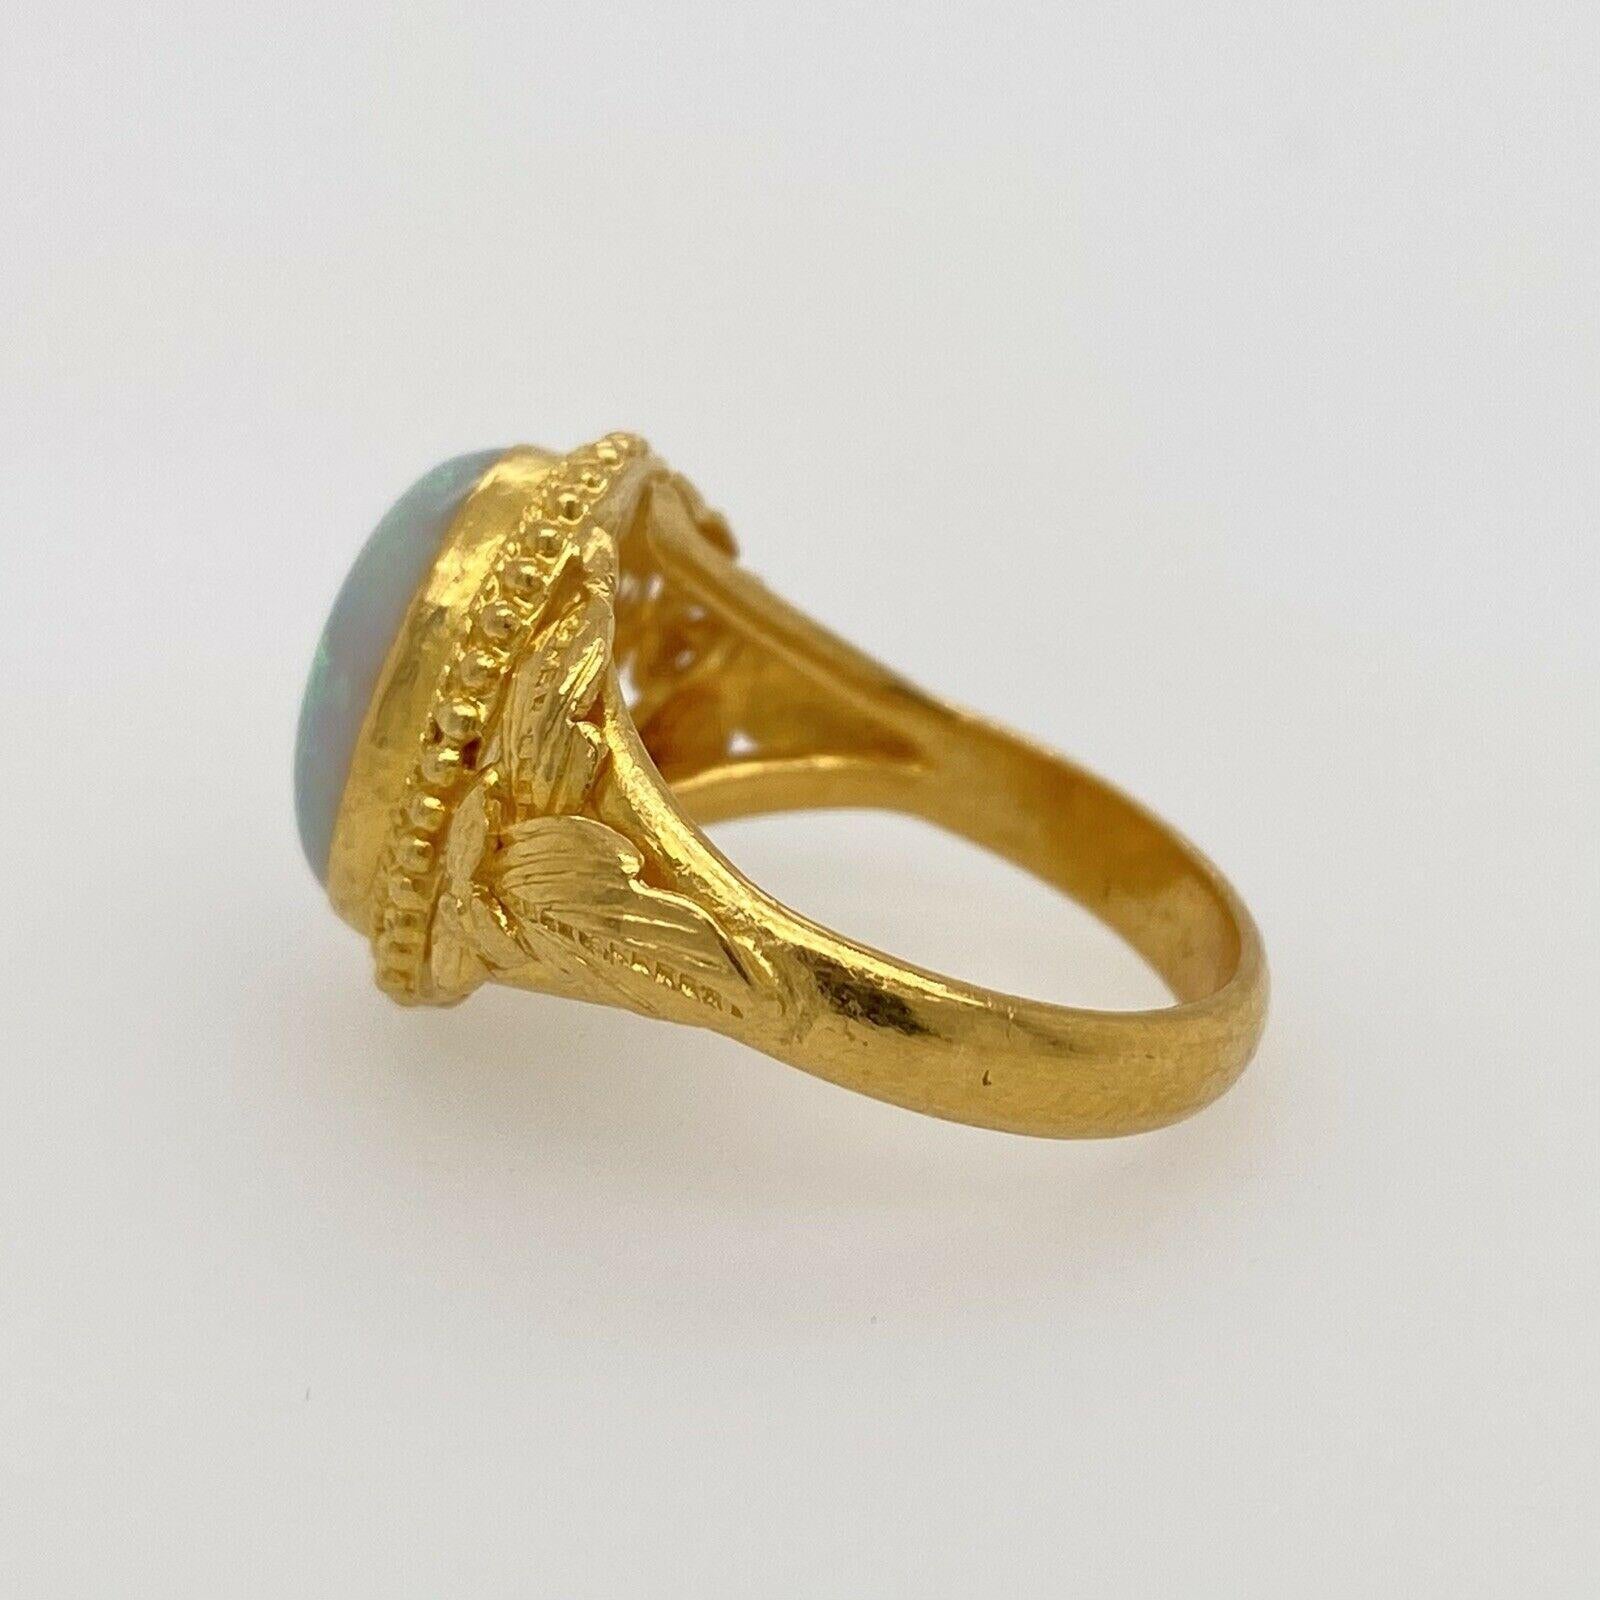 Vintage Solid 24 Karat Yellow Gold and Opal Ring 5.9g 1